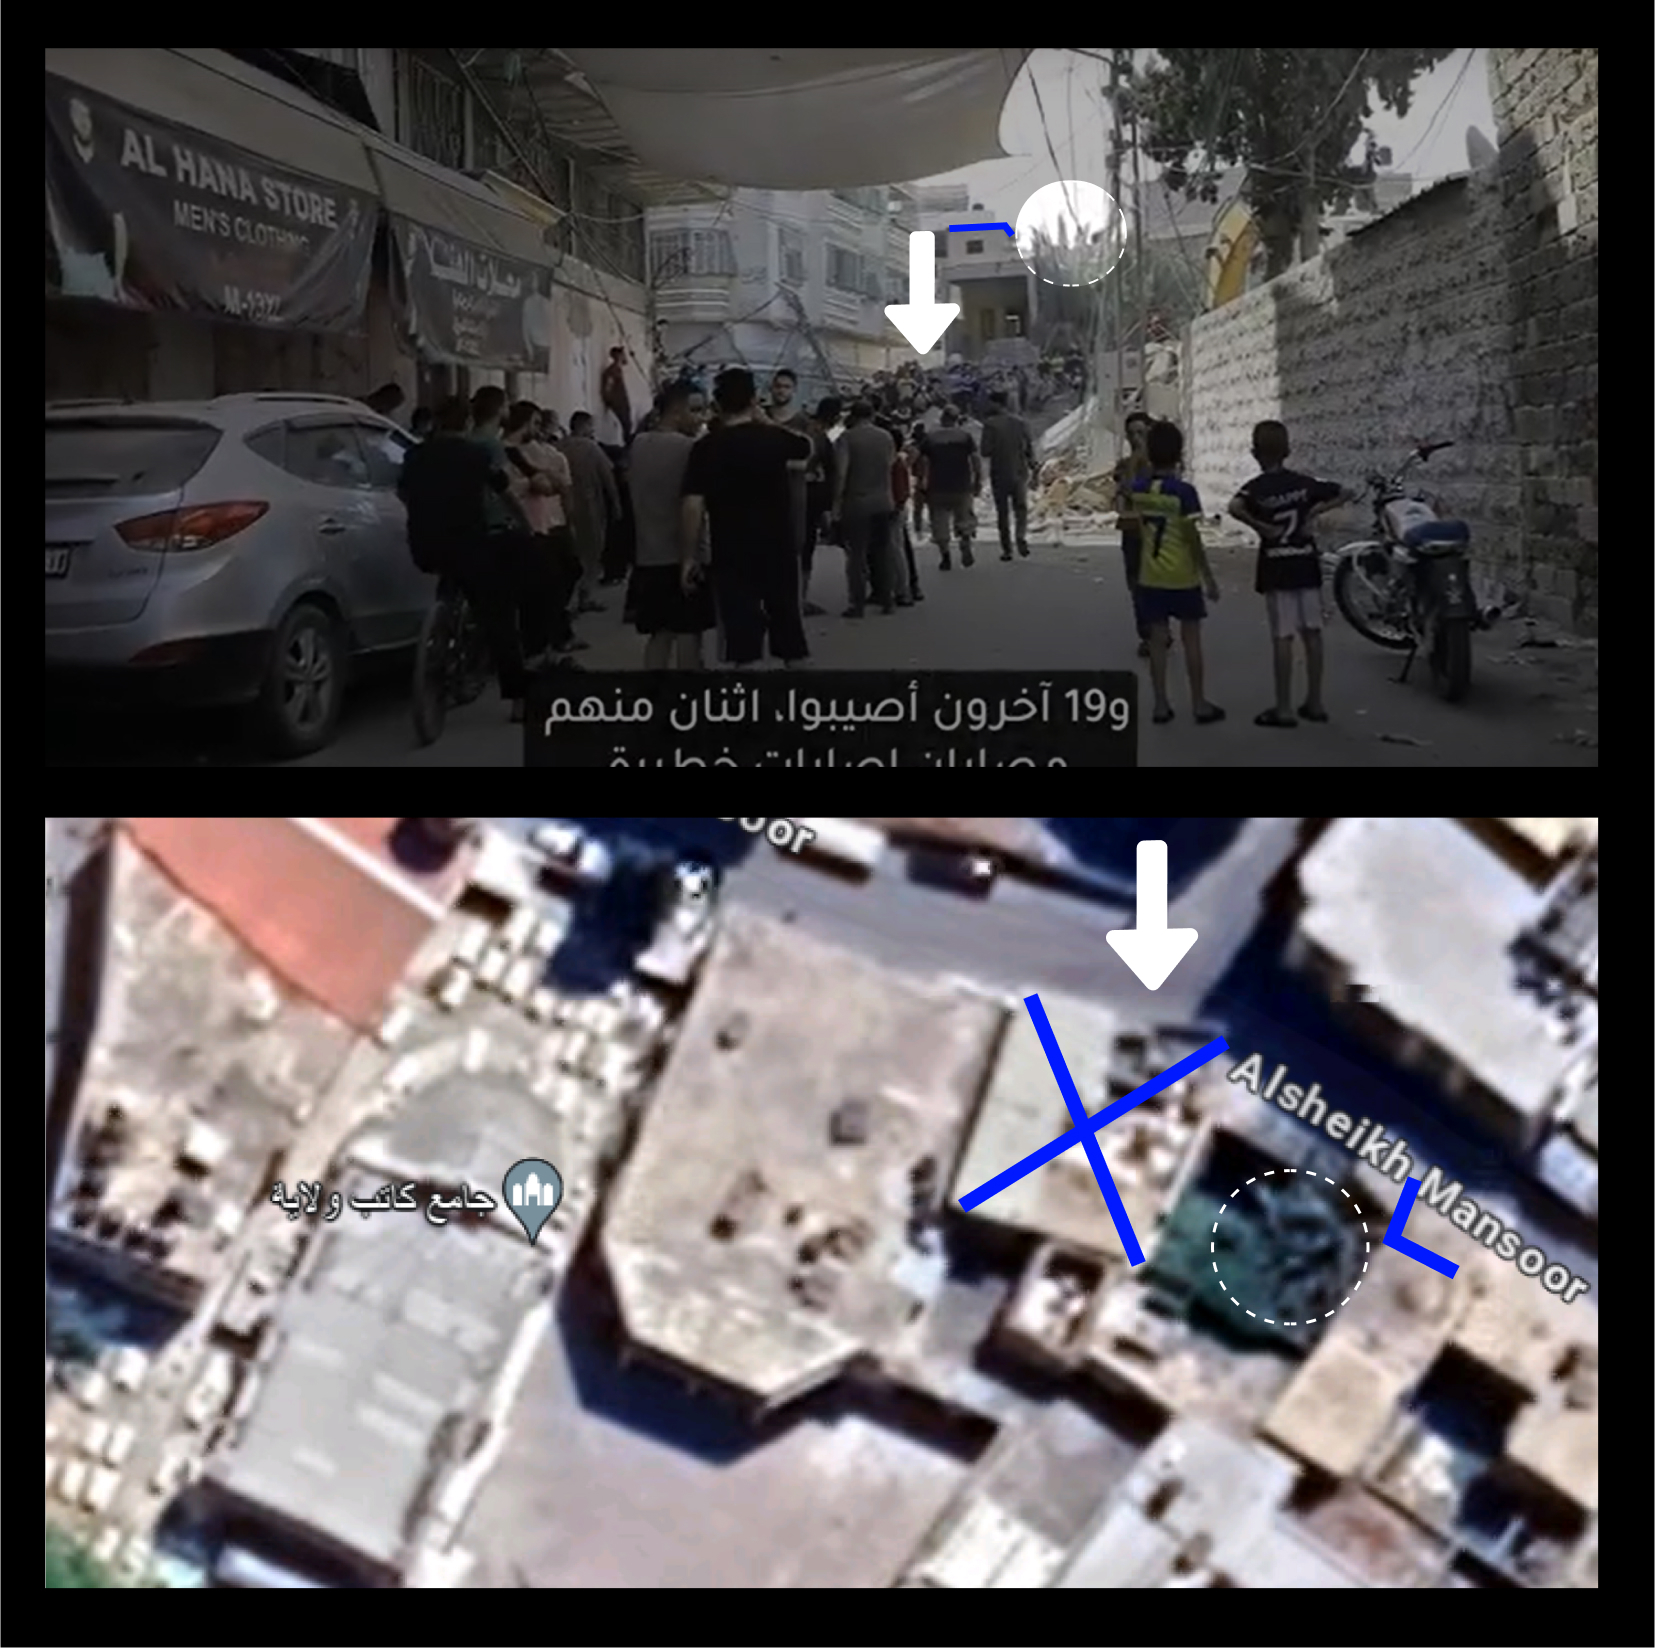 Images of an attacked building, marked by a blue X